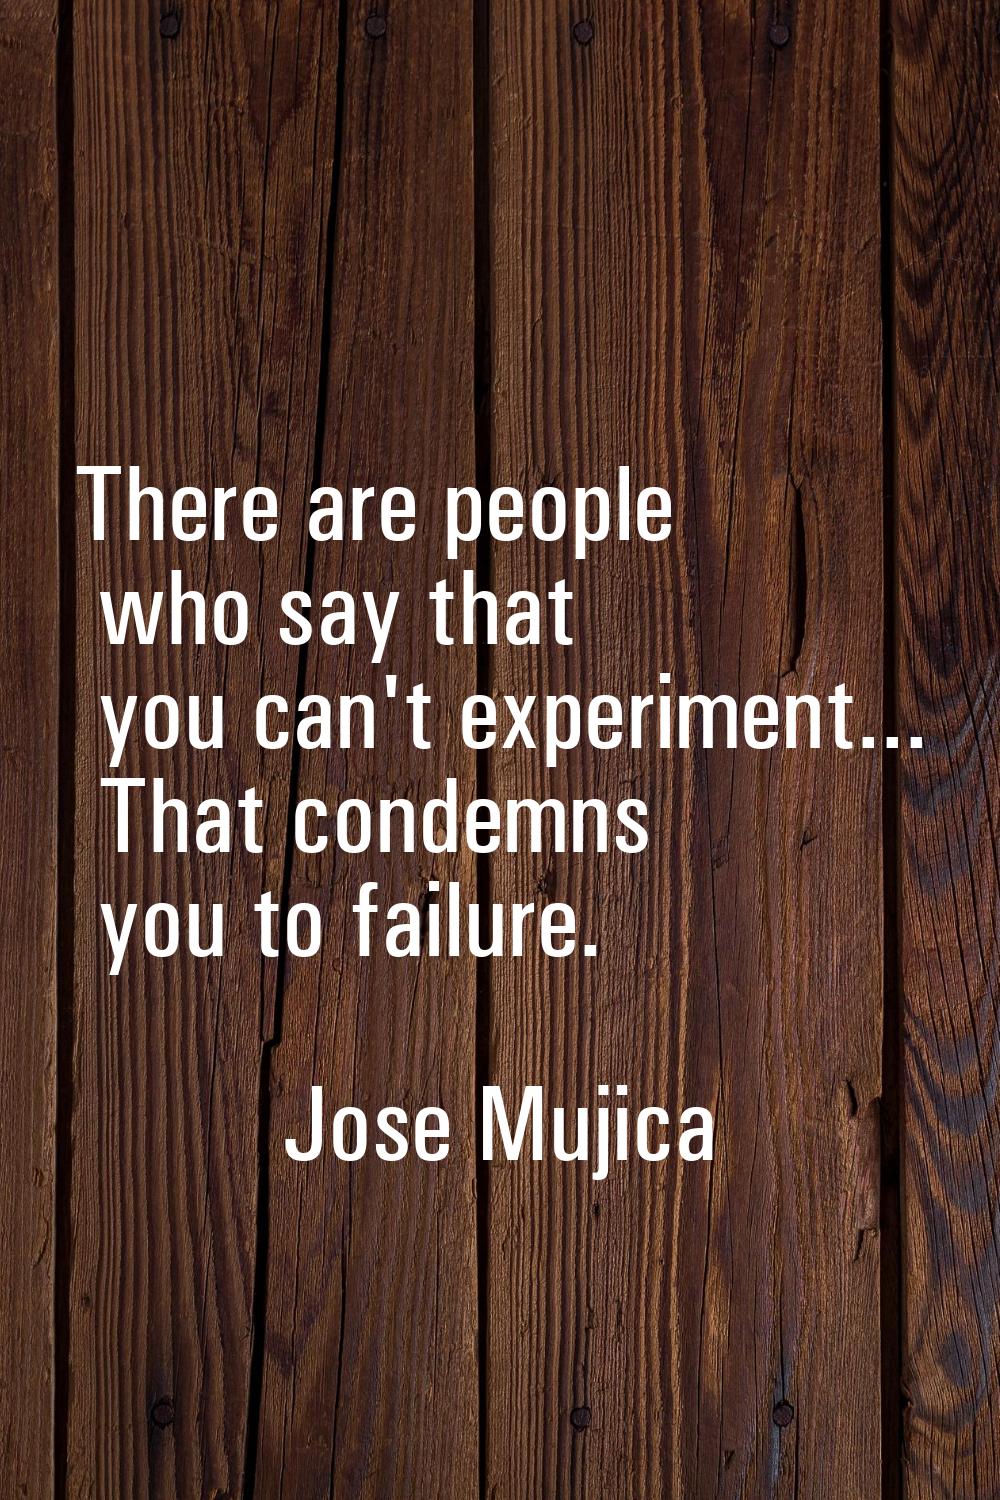 There are people who say that you can't experiment... That condemns you to failure.